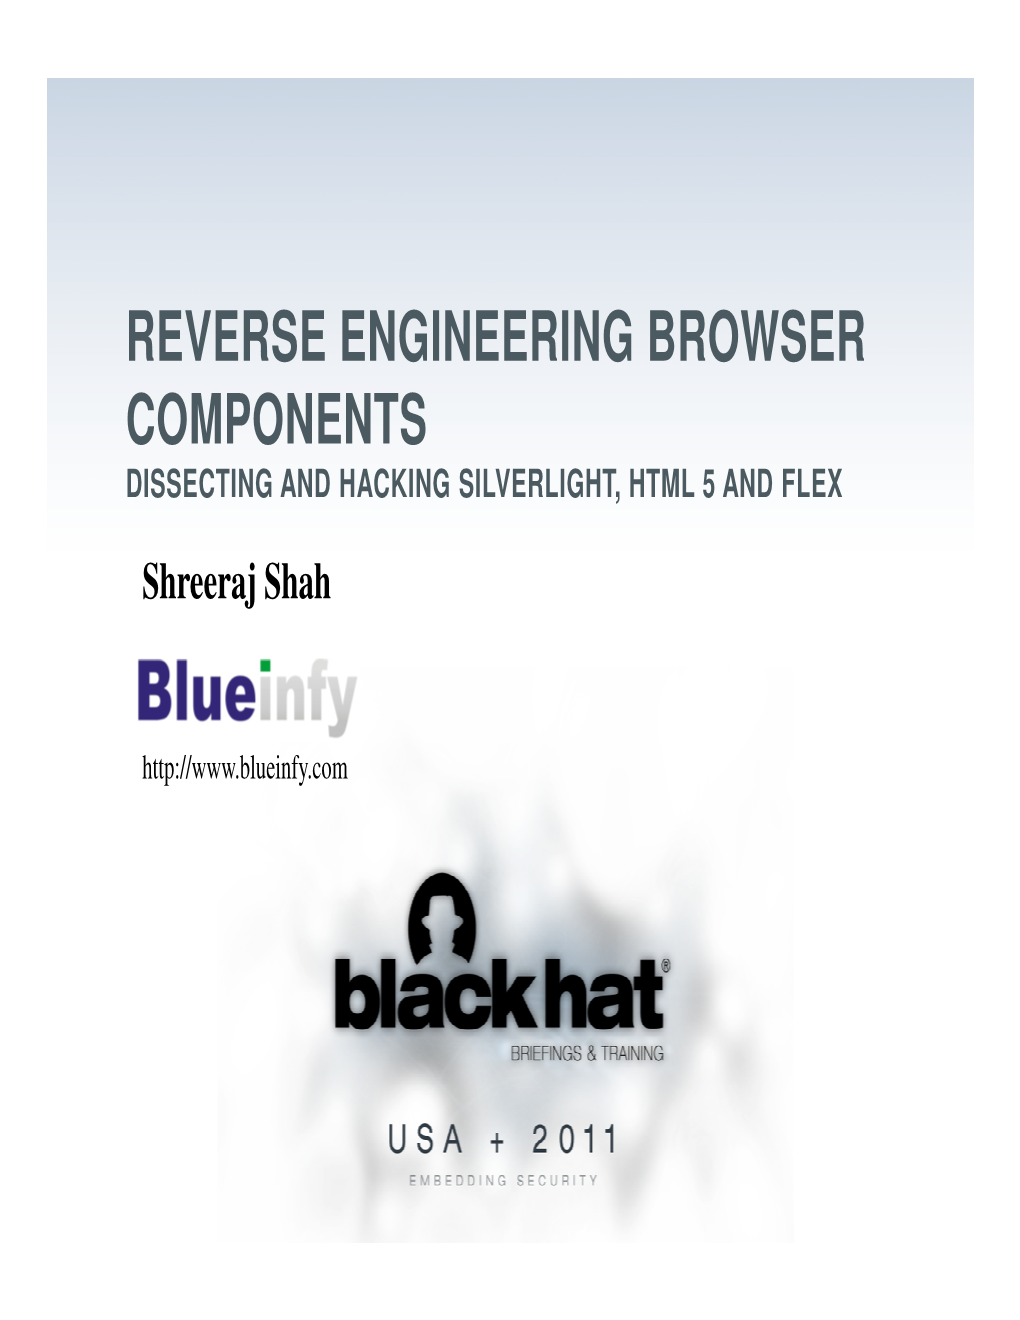 REVERSE ENGINEERING BROWSER COMPONENTS DISSECTING and HACKING SILVERLIGHT, HTML 5 and FLEX Shreeraj Shah